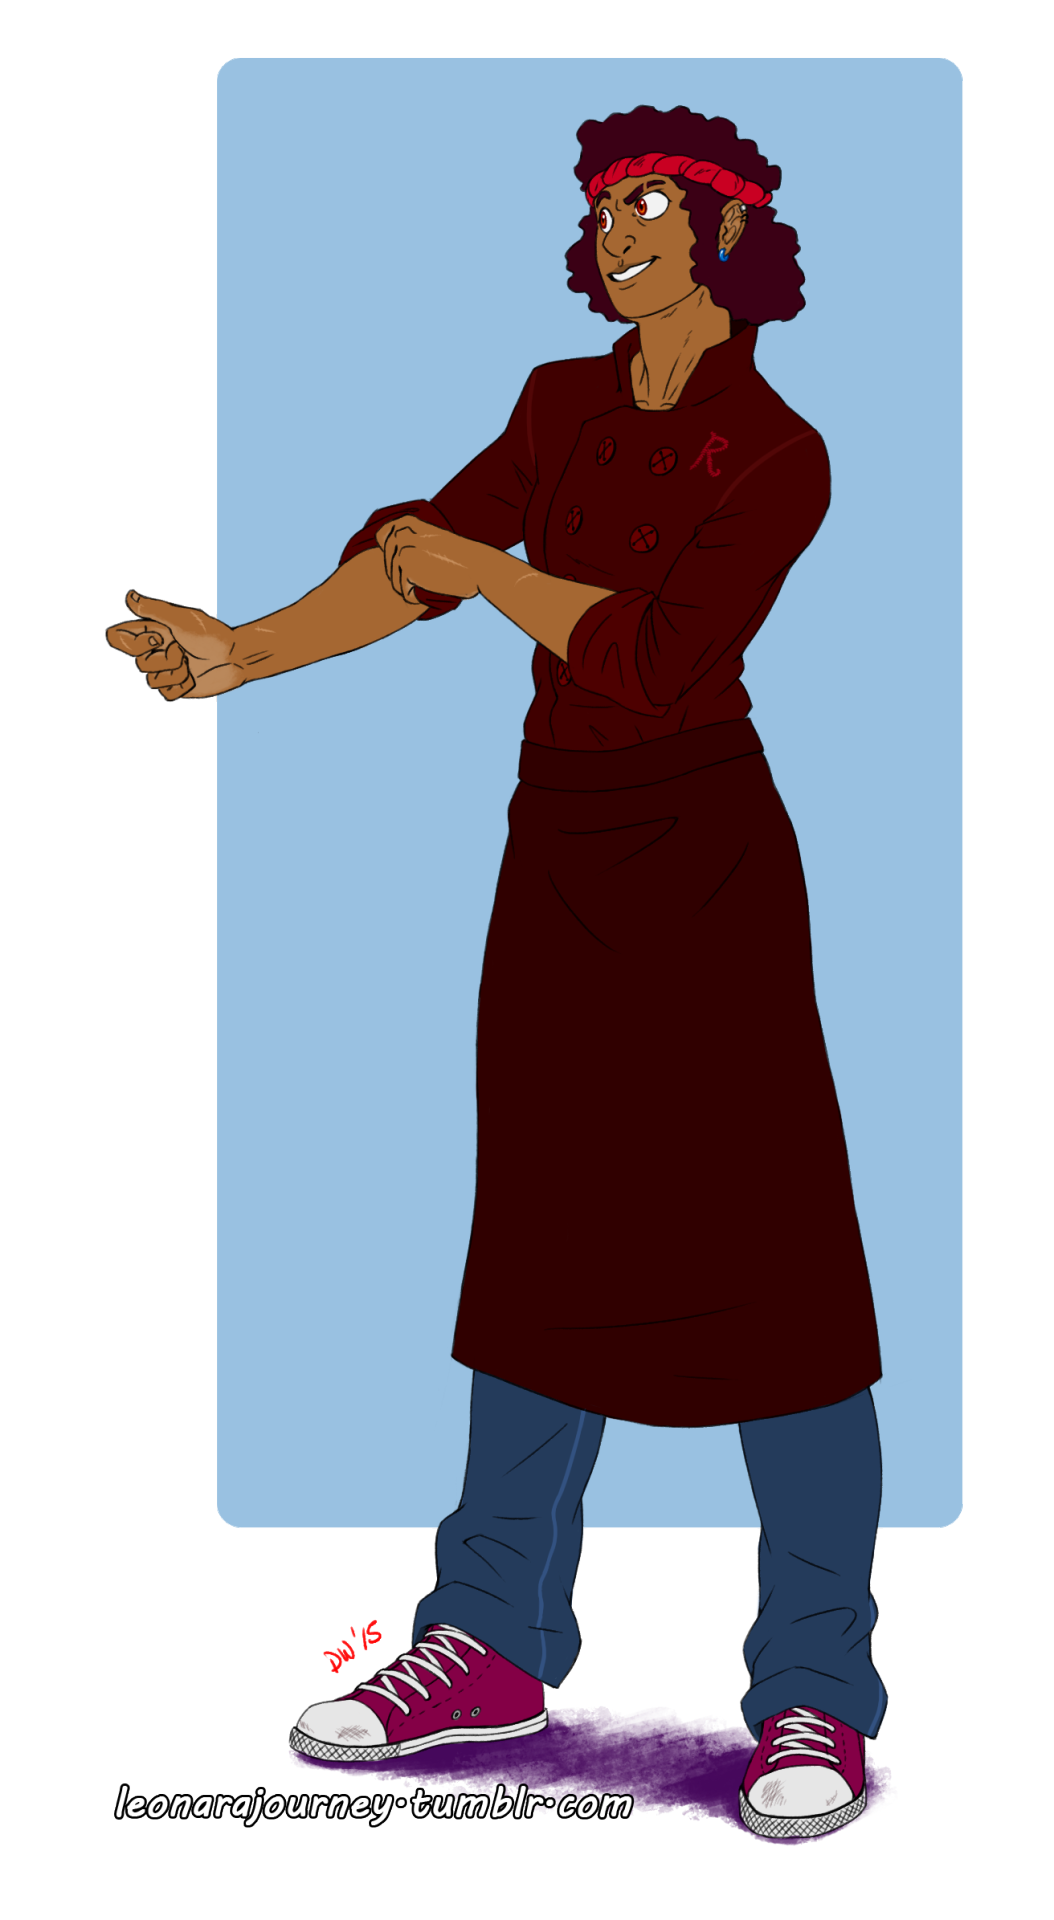 leonarajourney:  http://leonarajourney.tumblr.com/post/126790610230/i-think-that-a-nice-au-would-be-ruby-the-chef-and